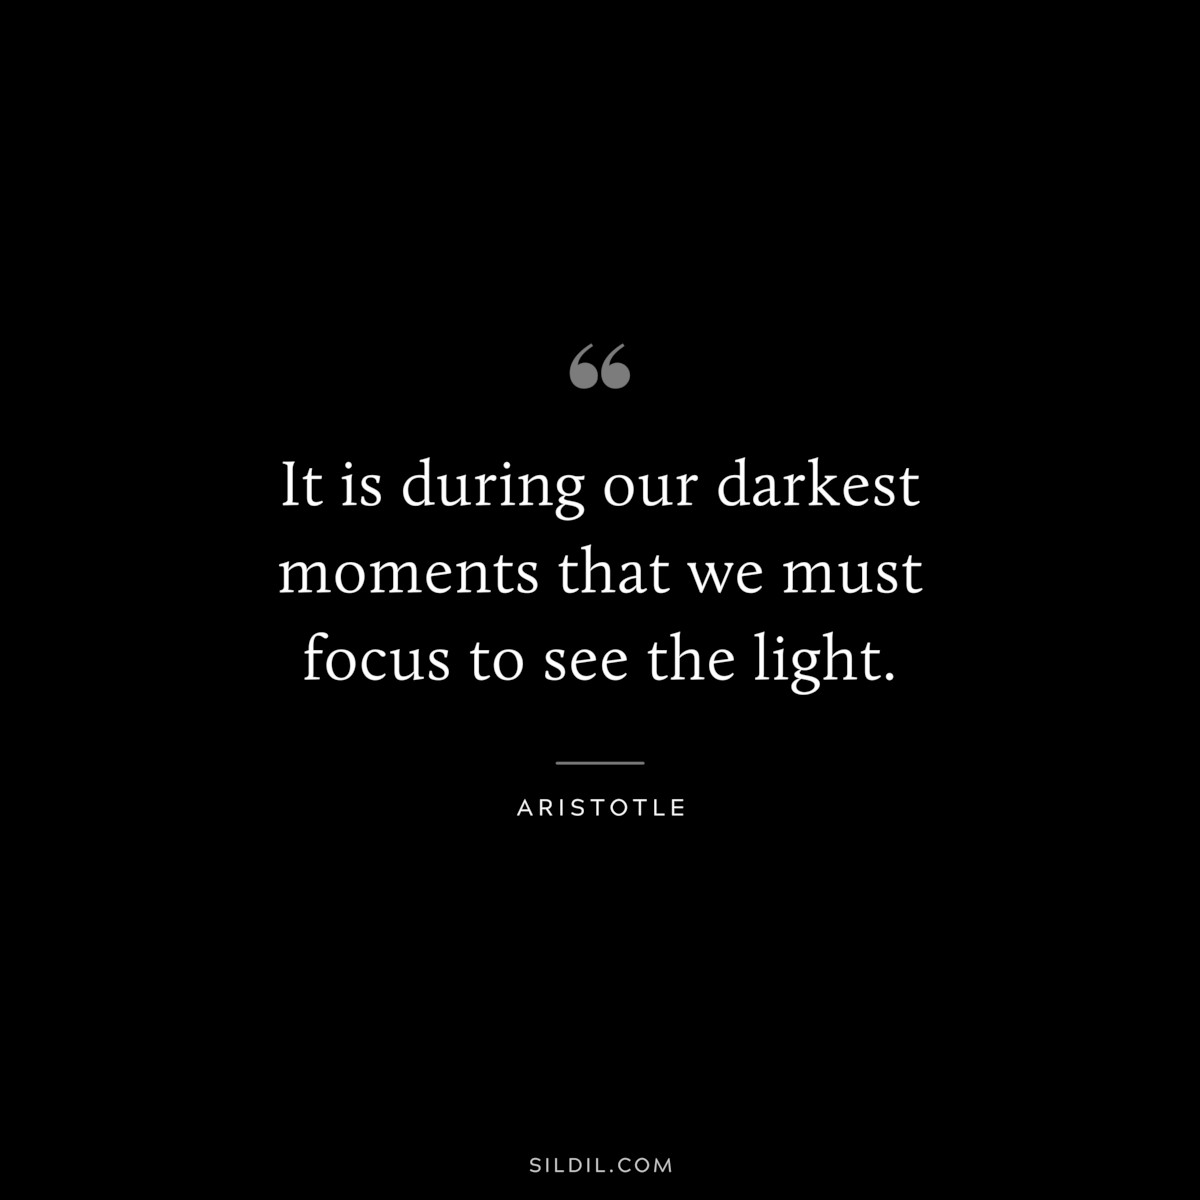 It is during our darkest moments that we must focus to see the light. ― Aristotle